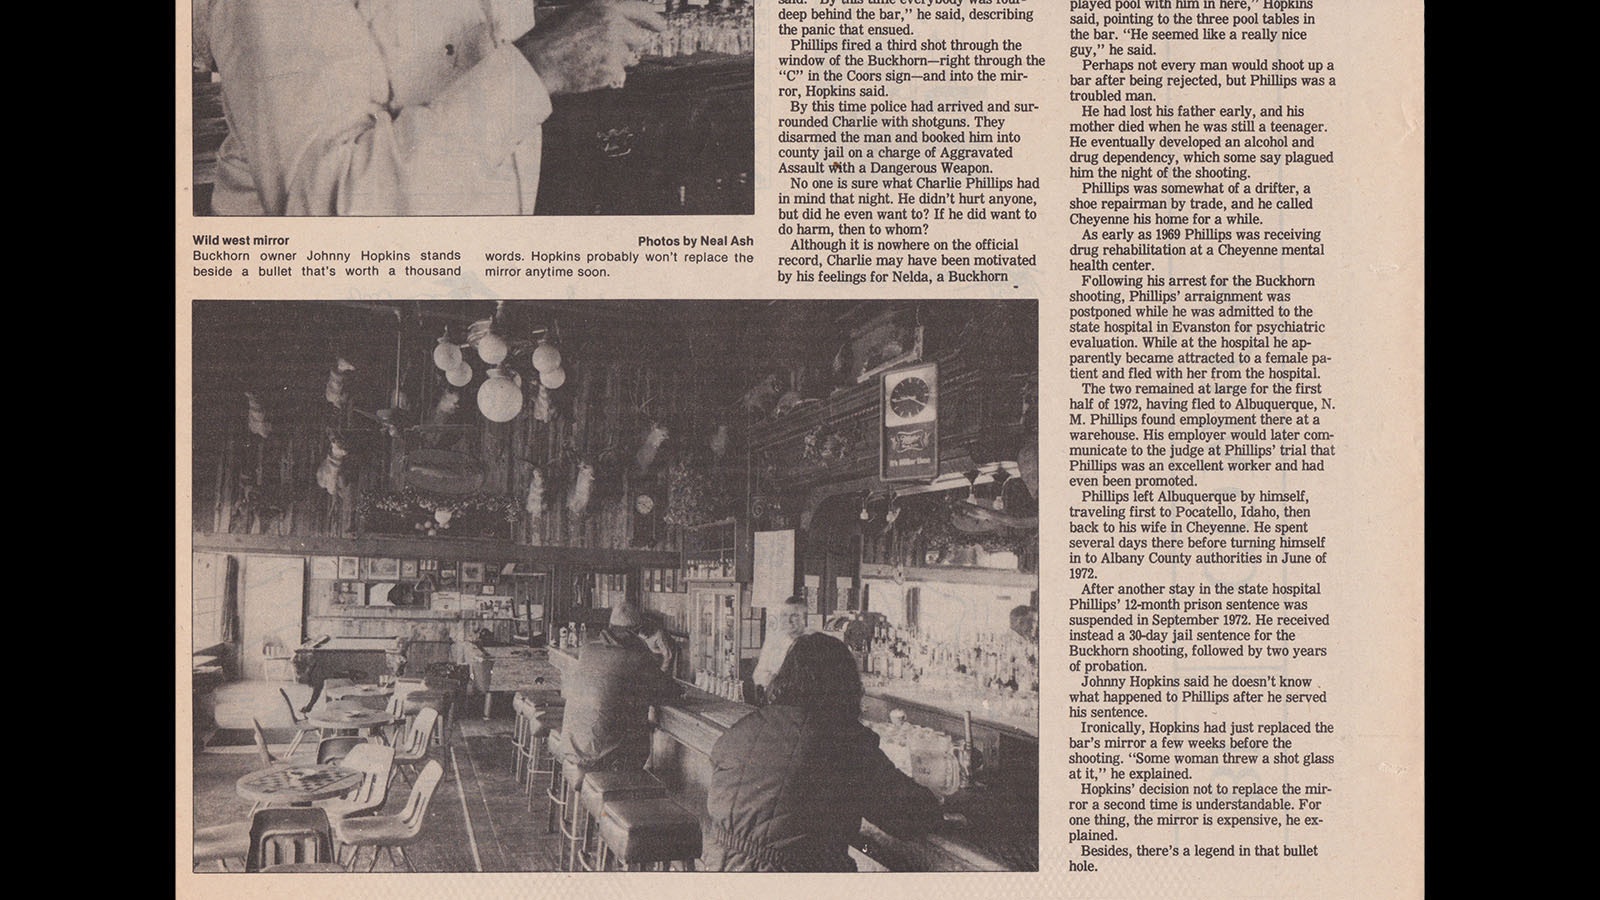 A local newspaper account of a shootout at the Buckhorn that's still legendary today. A bullet hole through the bar's back mirror from the shooting is still there.